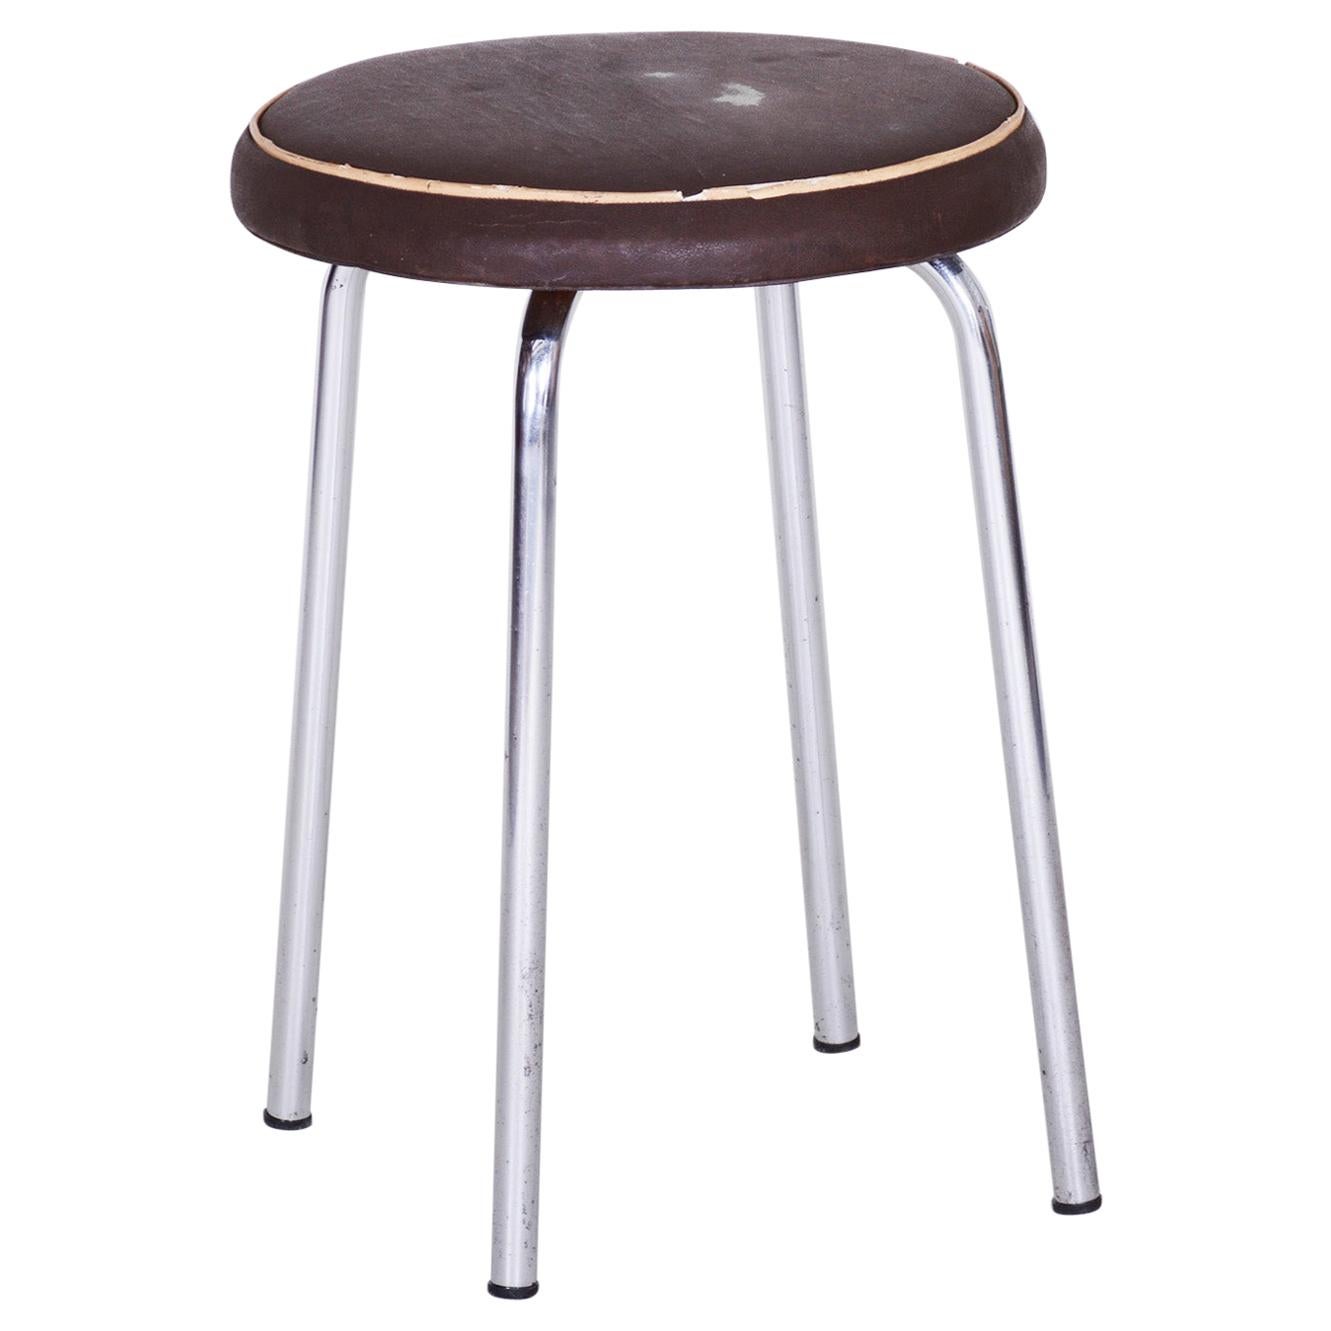 Small Round Bauhaus Chrome Stool by Robert Sezák, Original Leather, 1940s For Sale